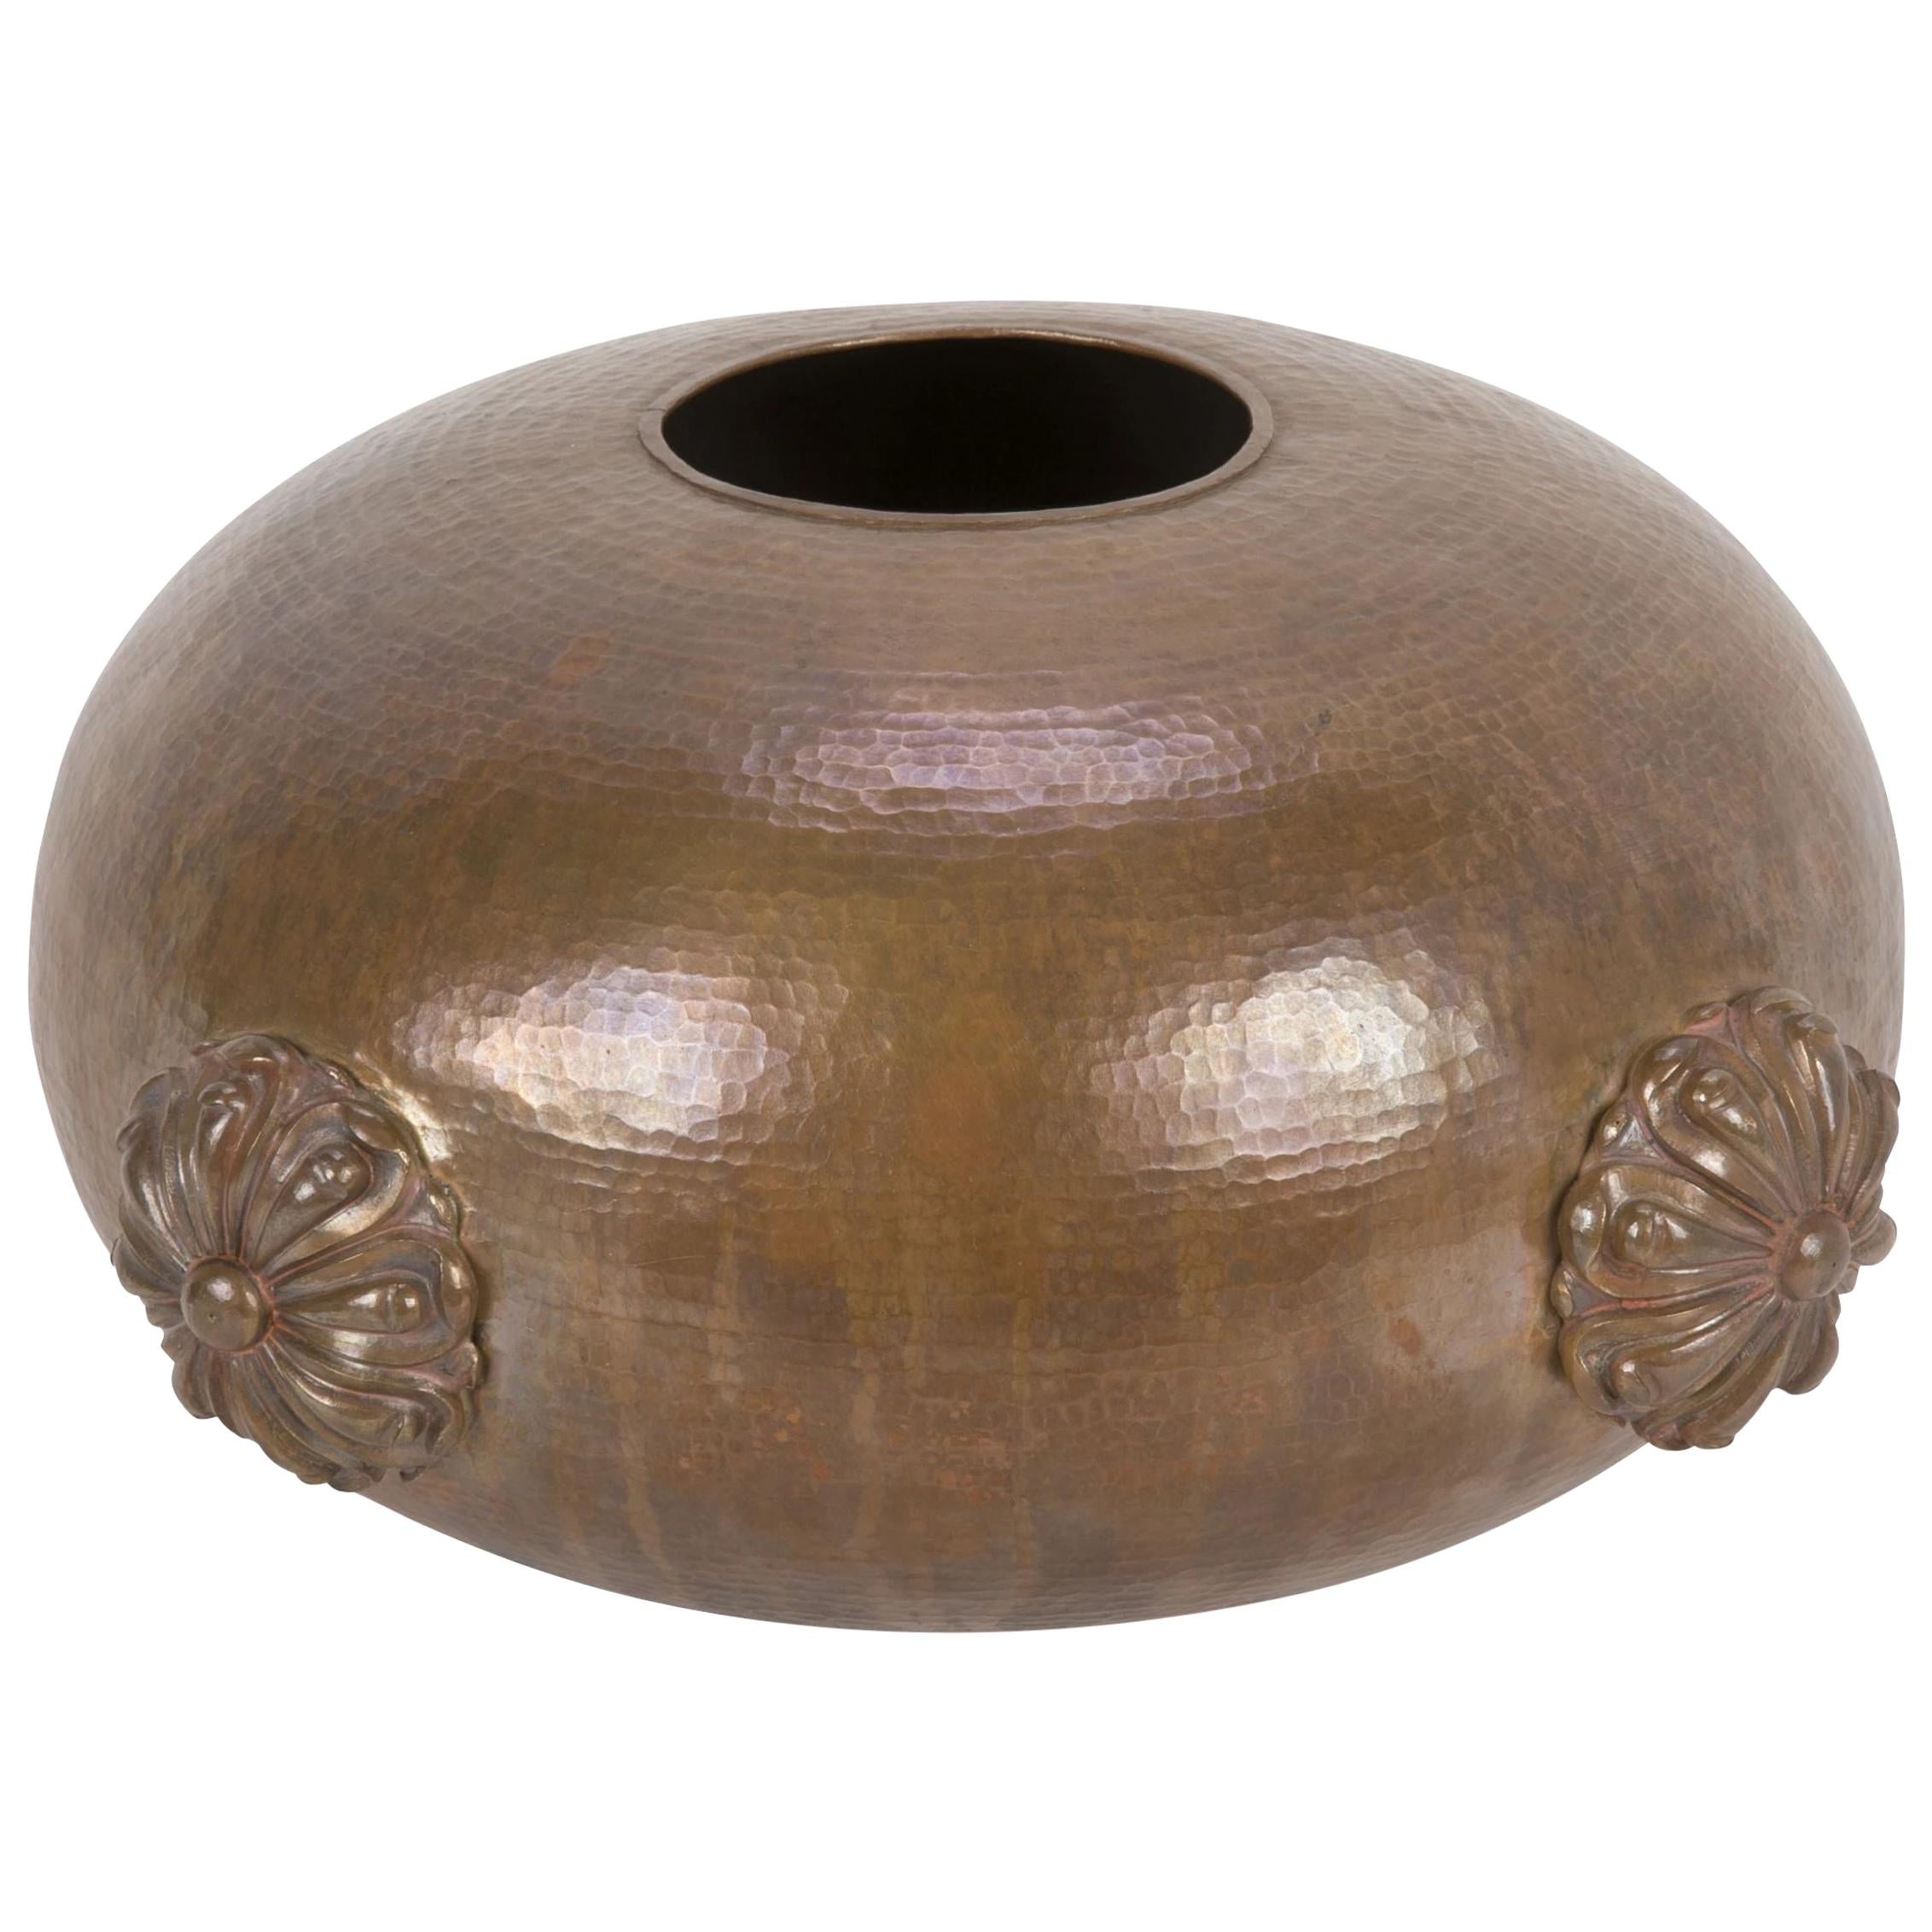 Round Repousse Copper Lotus Form Vase Handcrafted in India by Stephanie Odegard For Sale